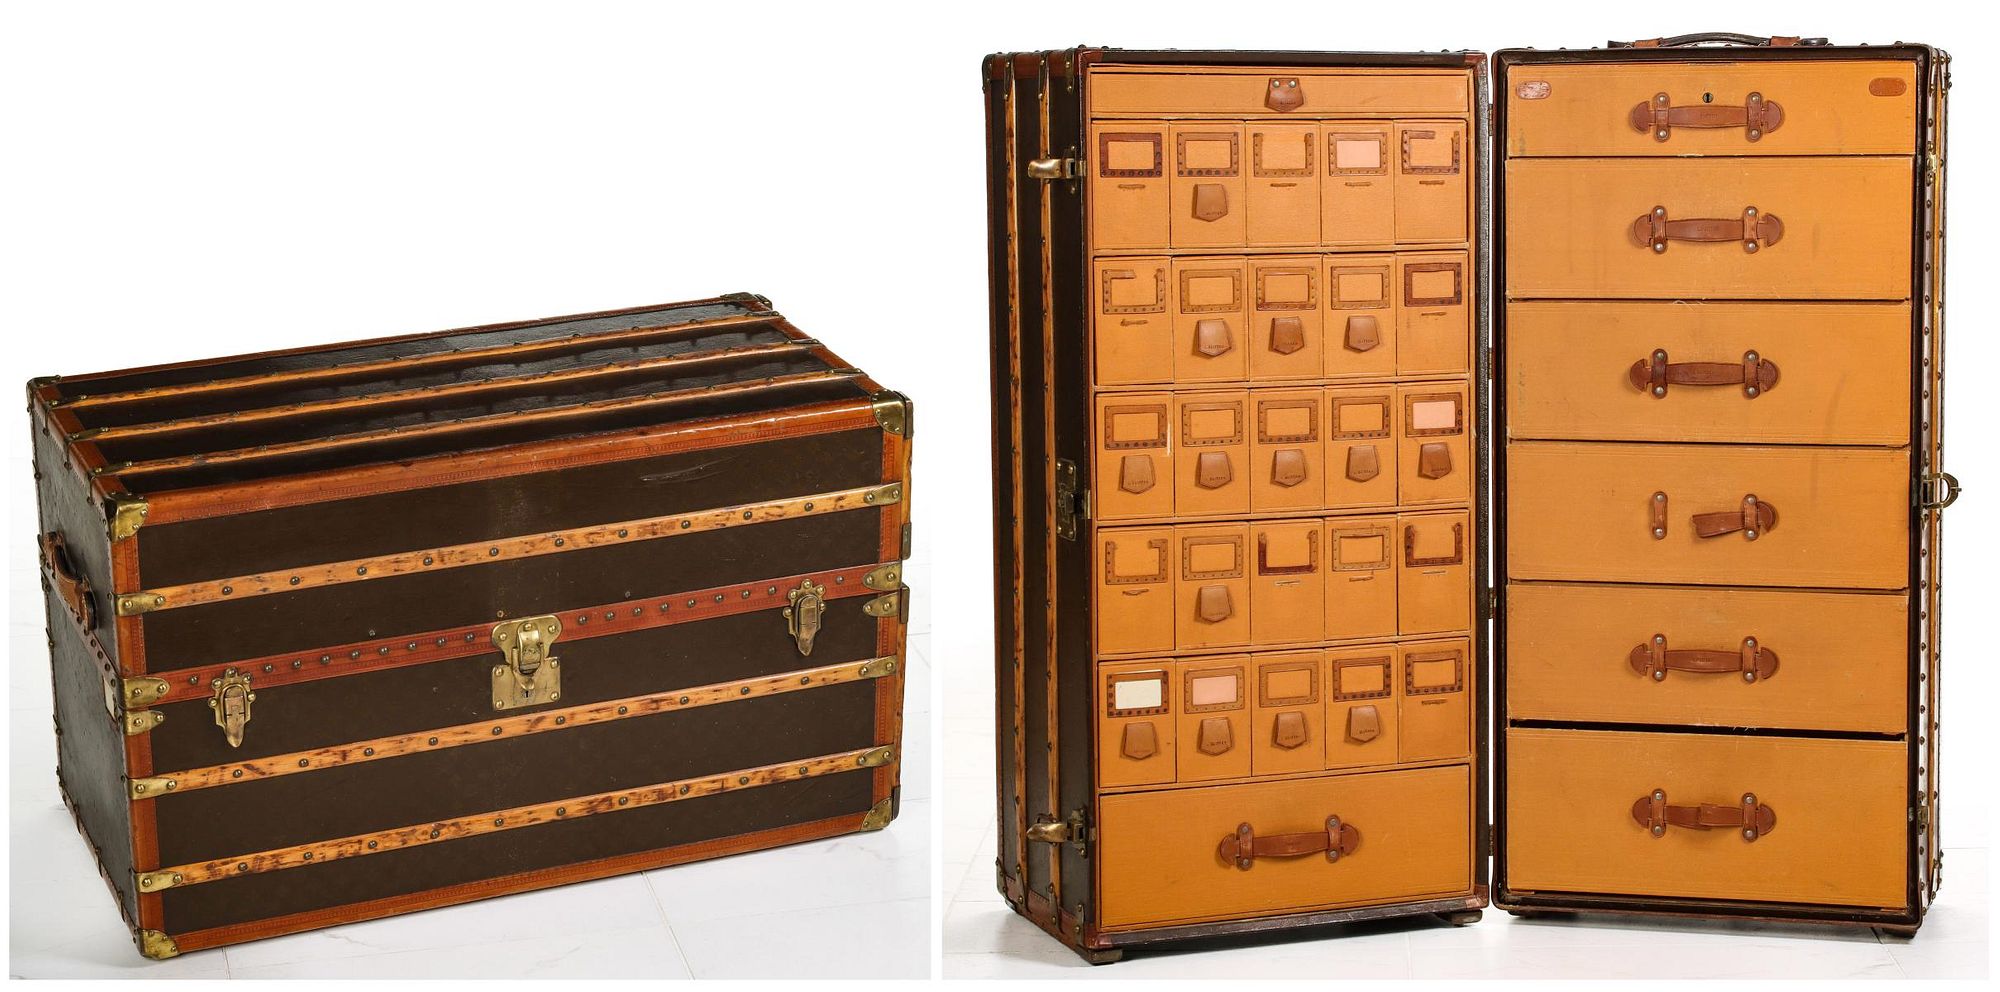 A RARE LOUIS VUITTON SHOE TRUNK WITH FITTED INTERIOR for sale at auction on  14th October